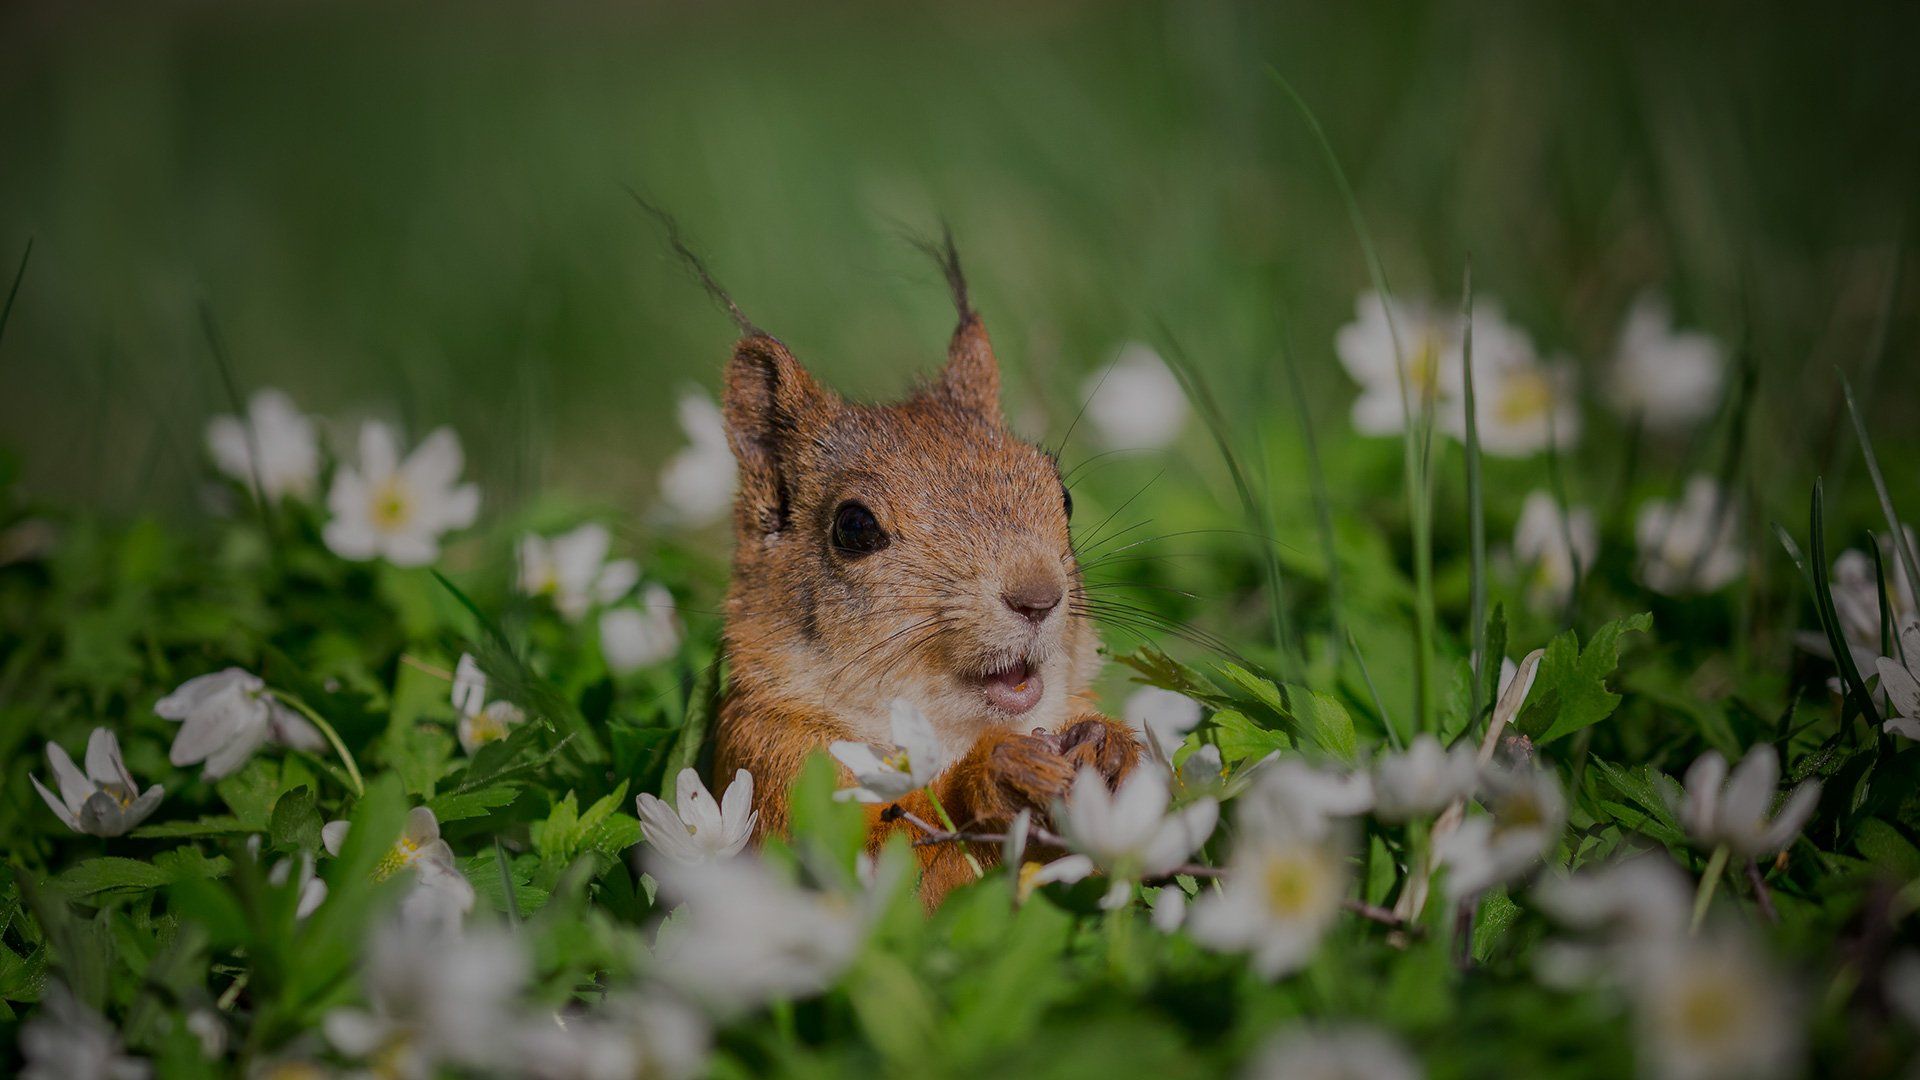 Urban nature photography tips: A squirrel looks up, paws in front of its body, surrounded by a field of white daisies and lush green grass up to its shoulders.